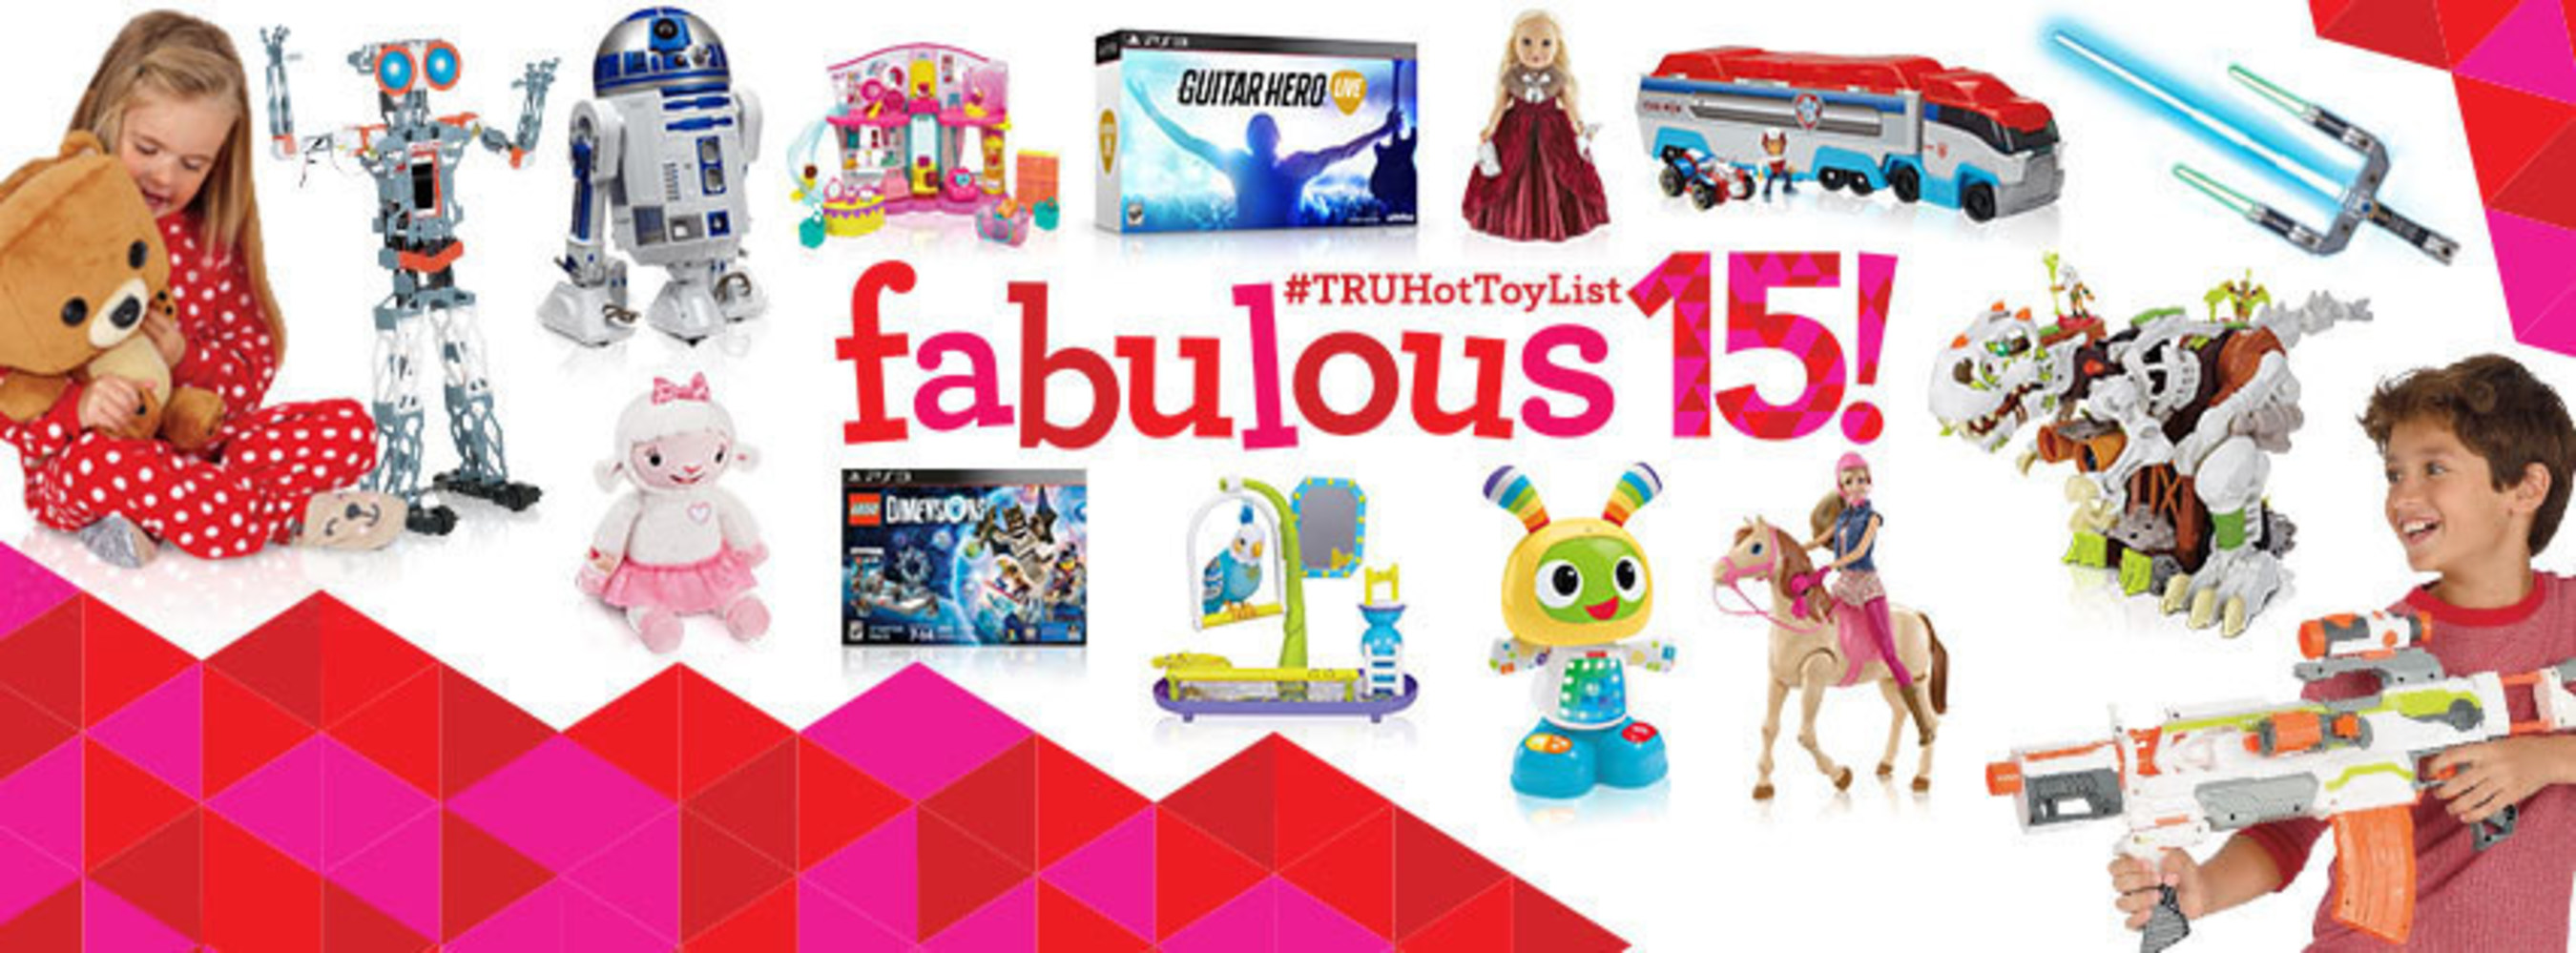 Hasbro and Lego Leading eCommerce Race for Best-Selling Toys and Games  Approaching Holiday Season